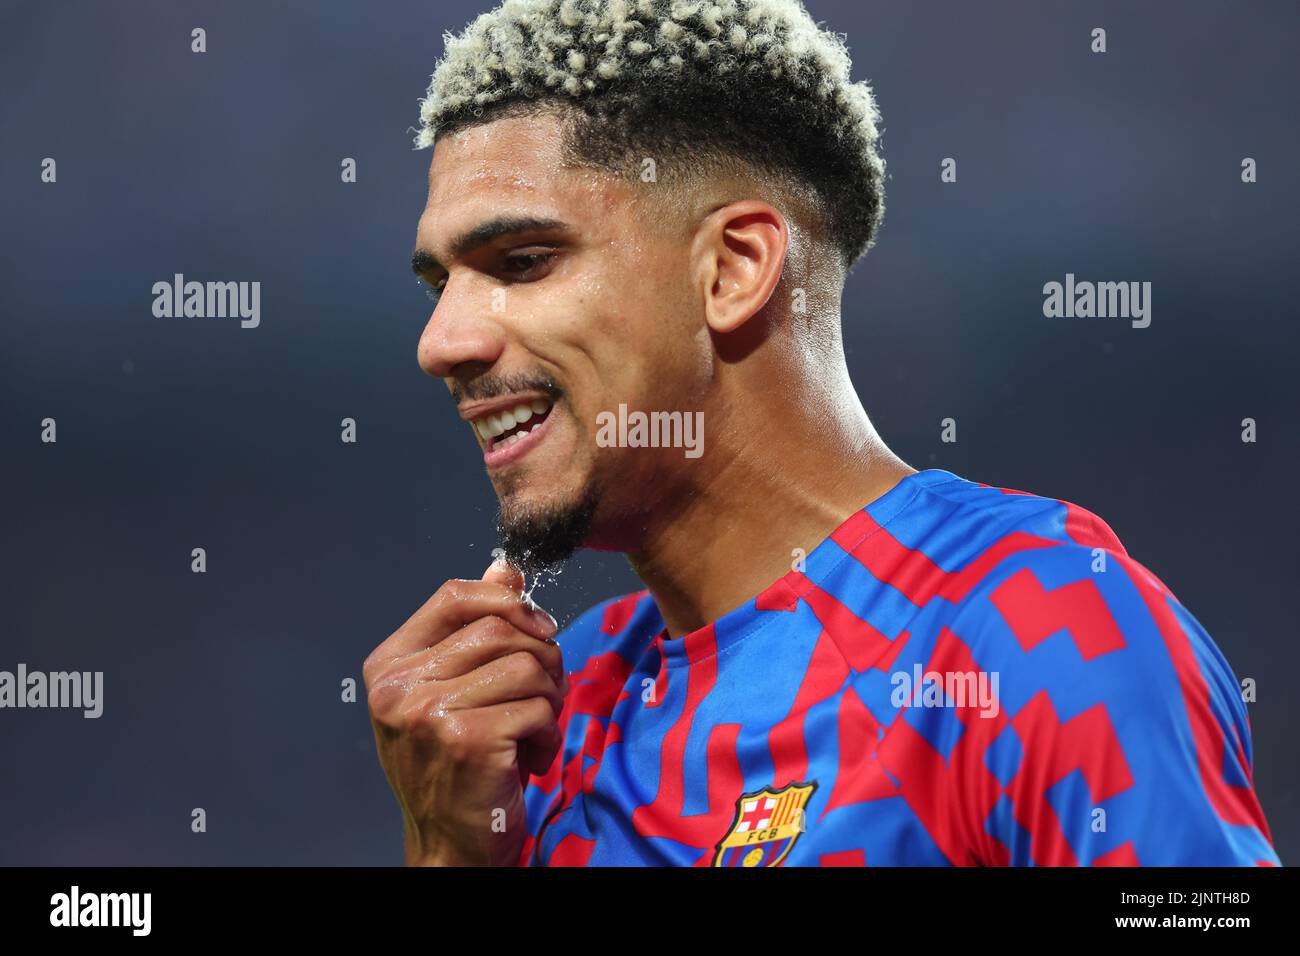 Ronald Araujo of FC Barcelona during the Liga match between FC Barcelona and Rayo Vallecano at Spotify Camp Nou in Barcelona, Spain. Stock Photo